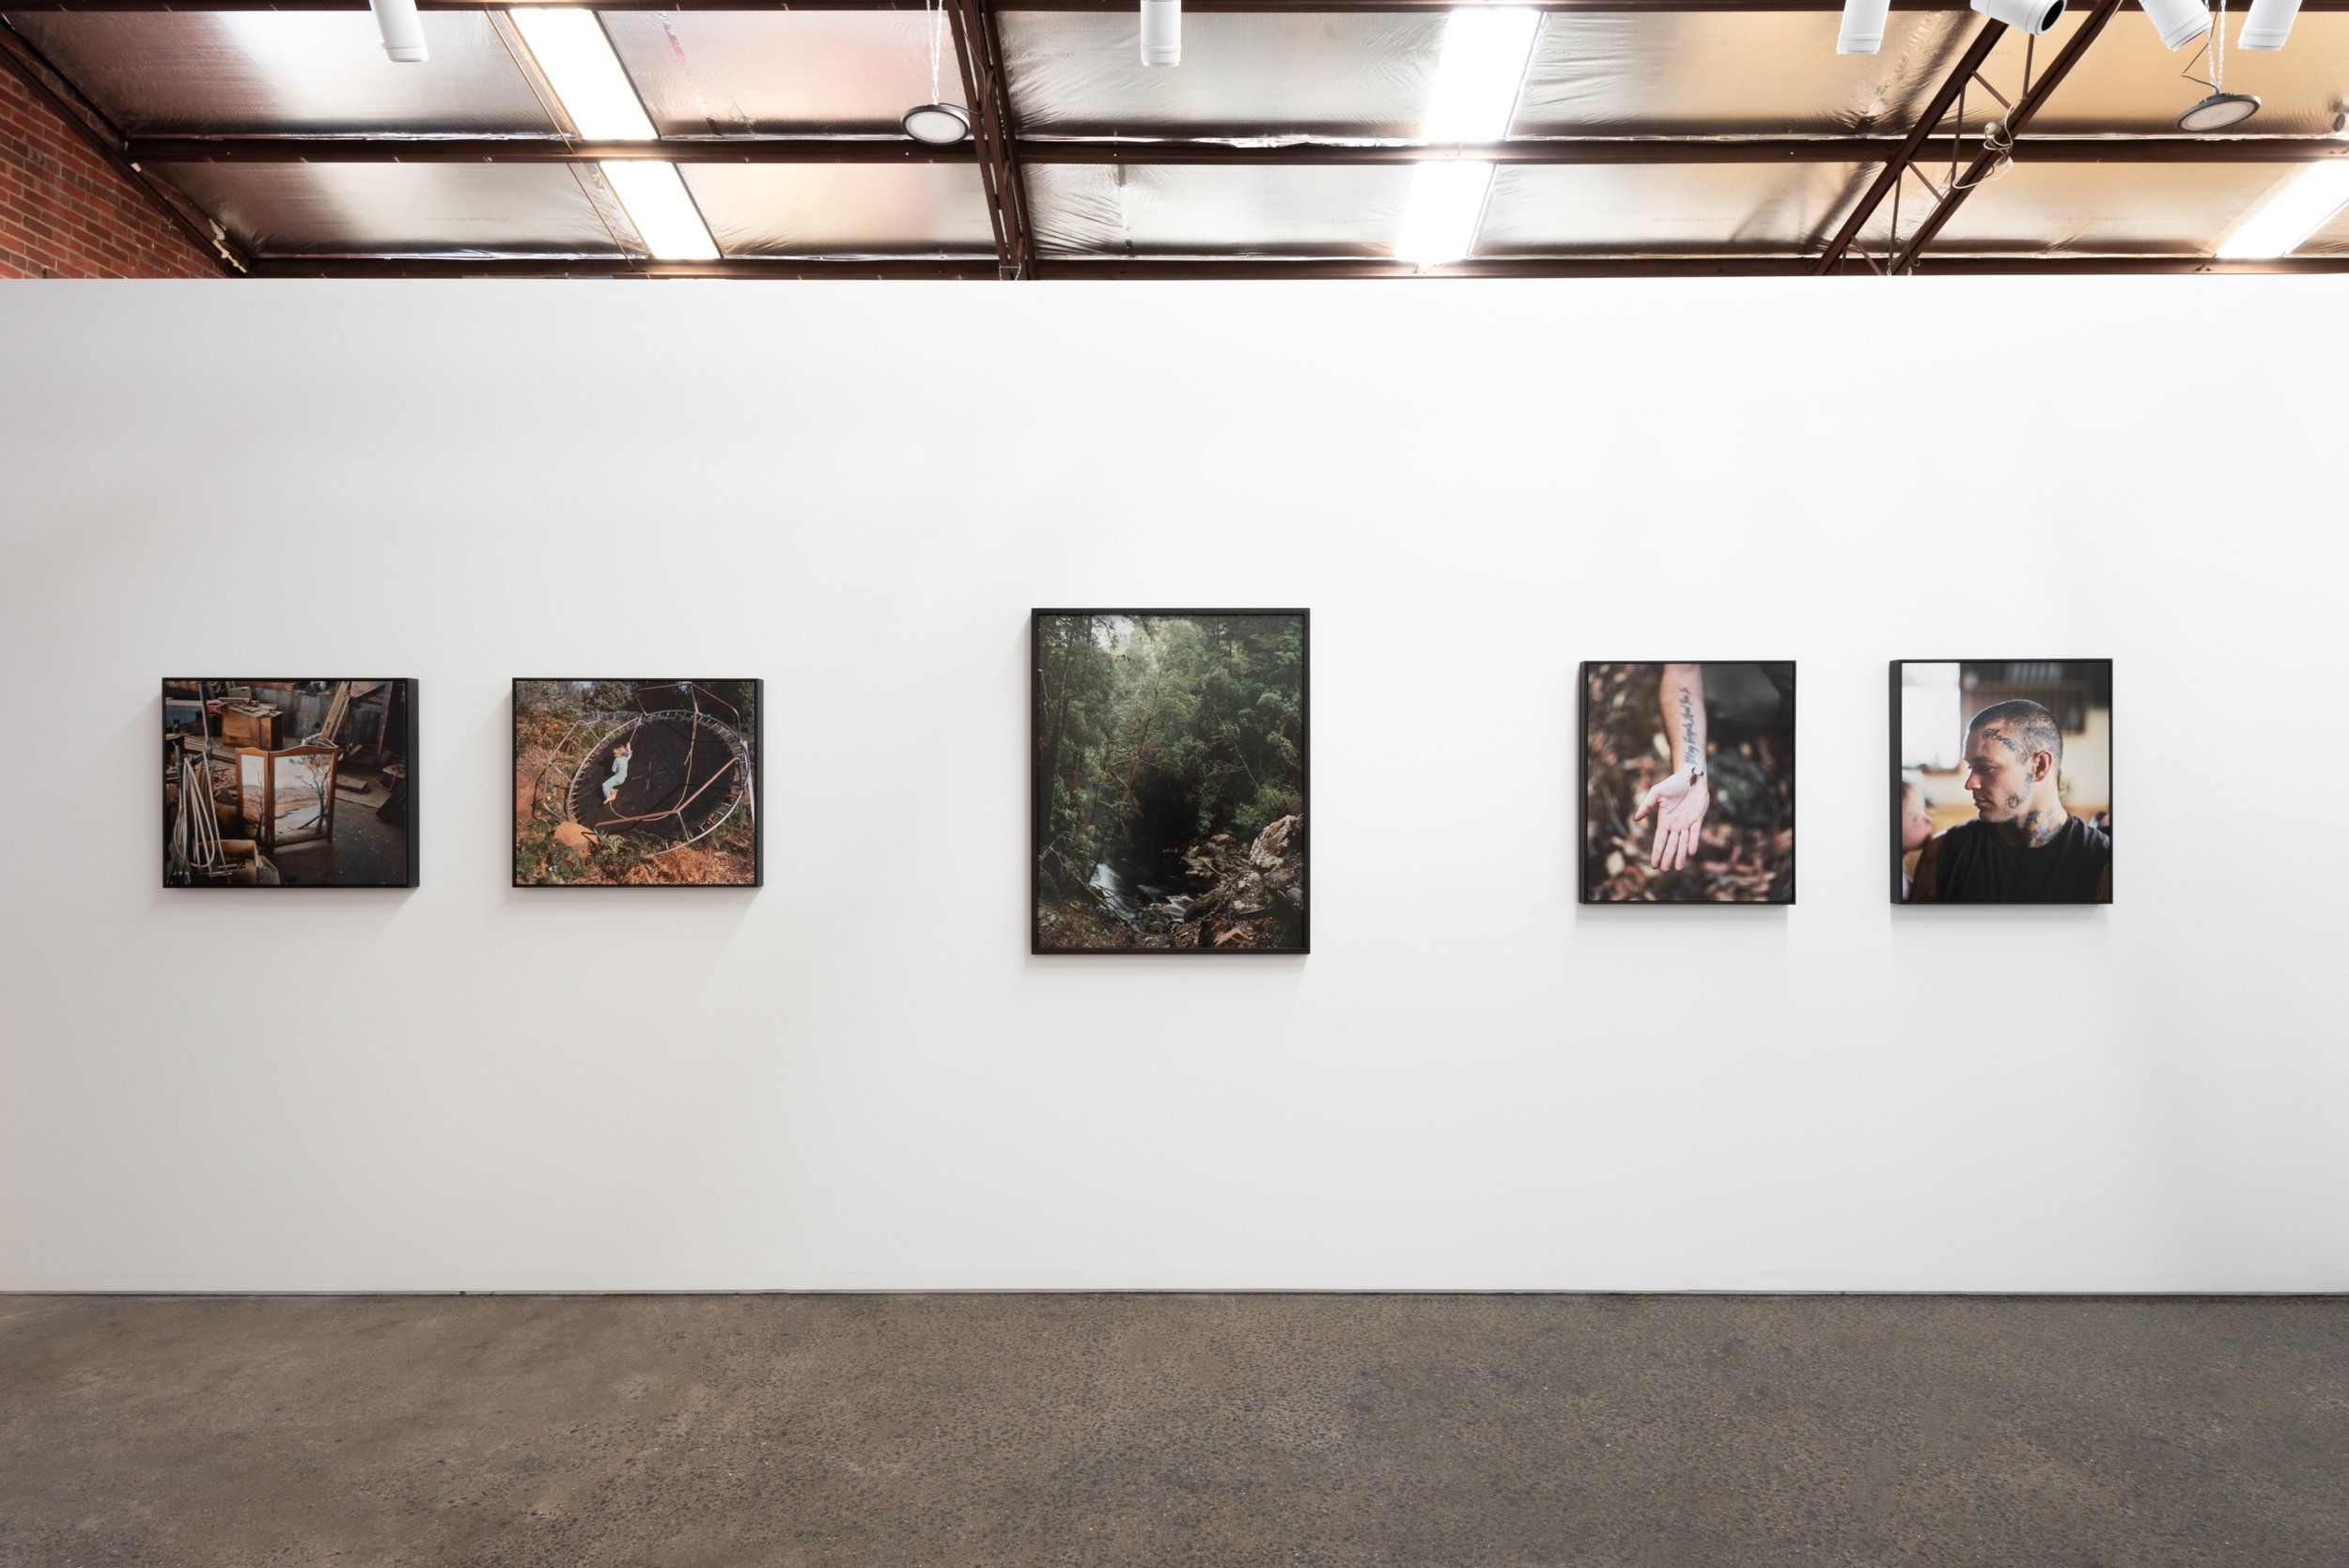   Huon  installation at Hillvale Gallery in Melbourne, Australia, July 2021 as part of The Pool Grant X. 